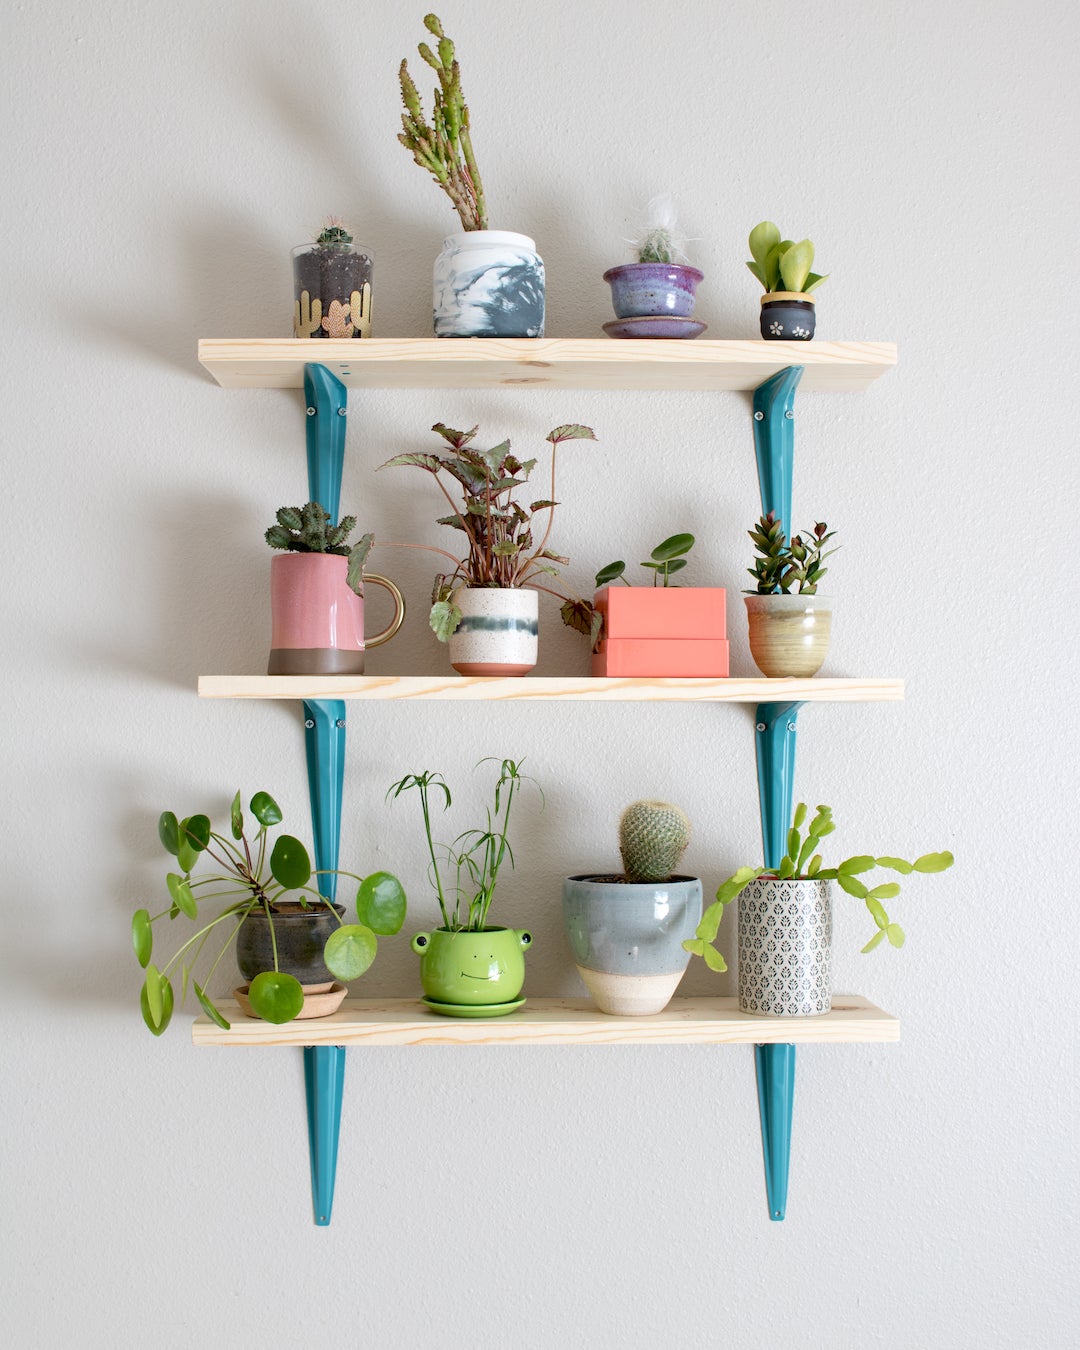 Shelves Filled With Plants